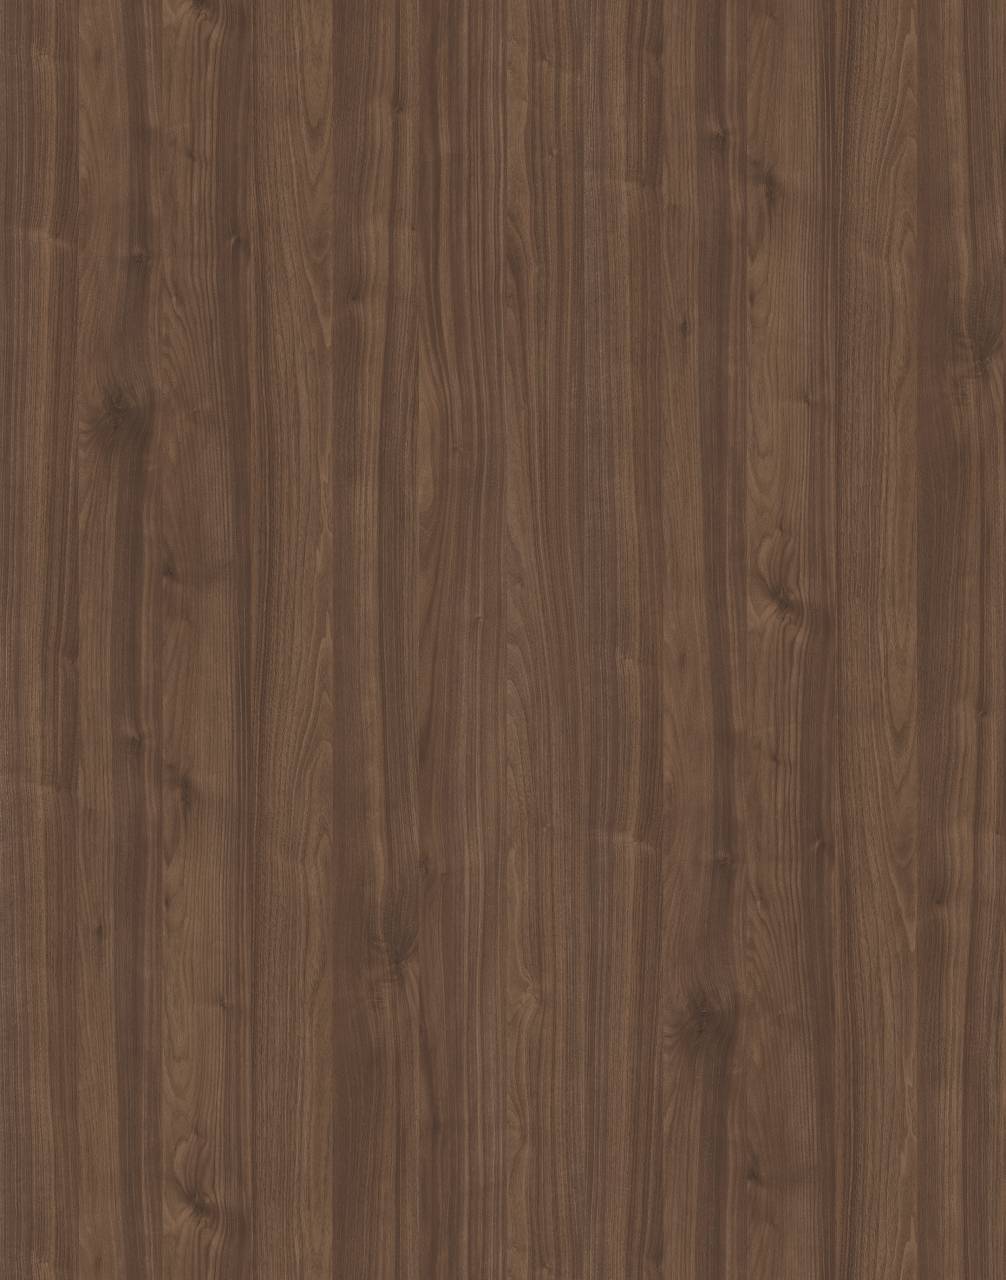 Fireside Select Walnuts PW HPL with textured surface and rich dark brown tones for an elegant and sophisticated look.